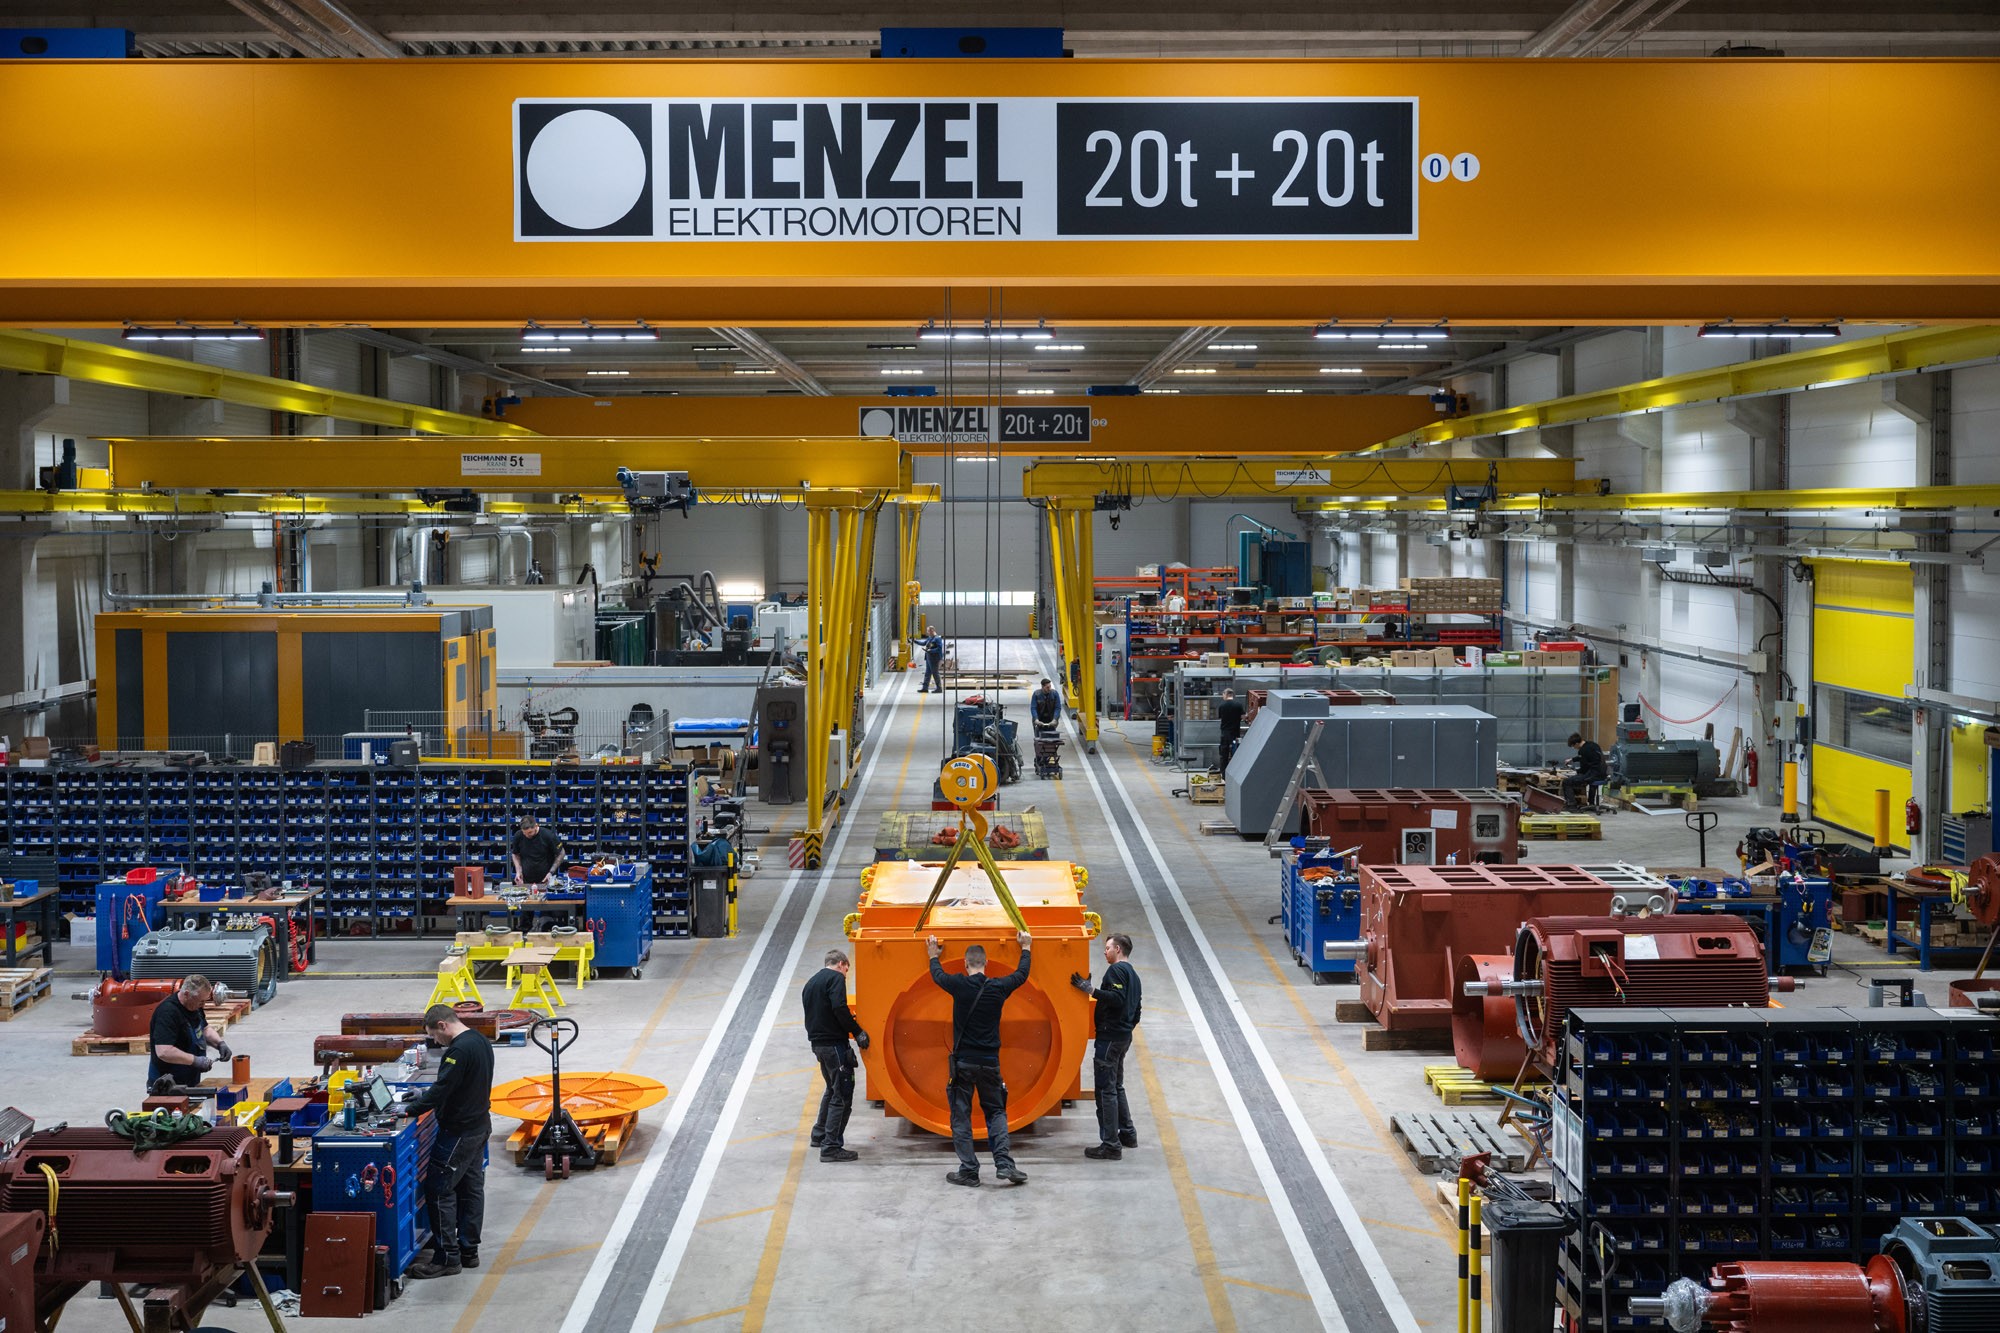 Menzel inaugurates new headquarters and motor plant